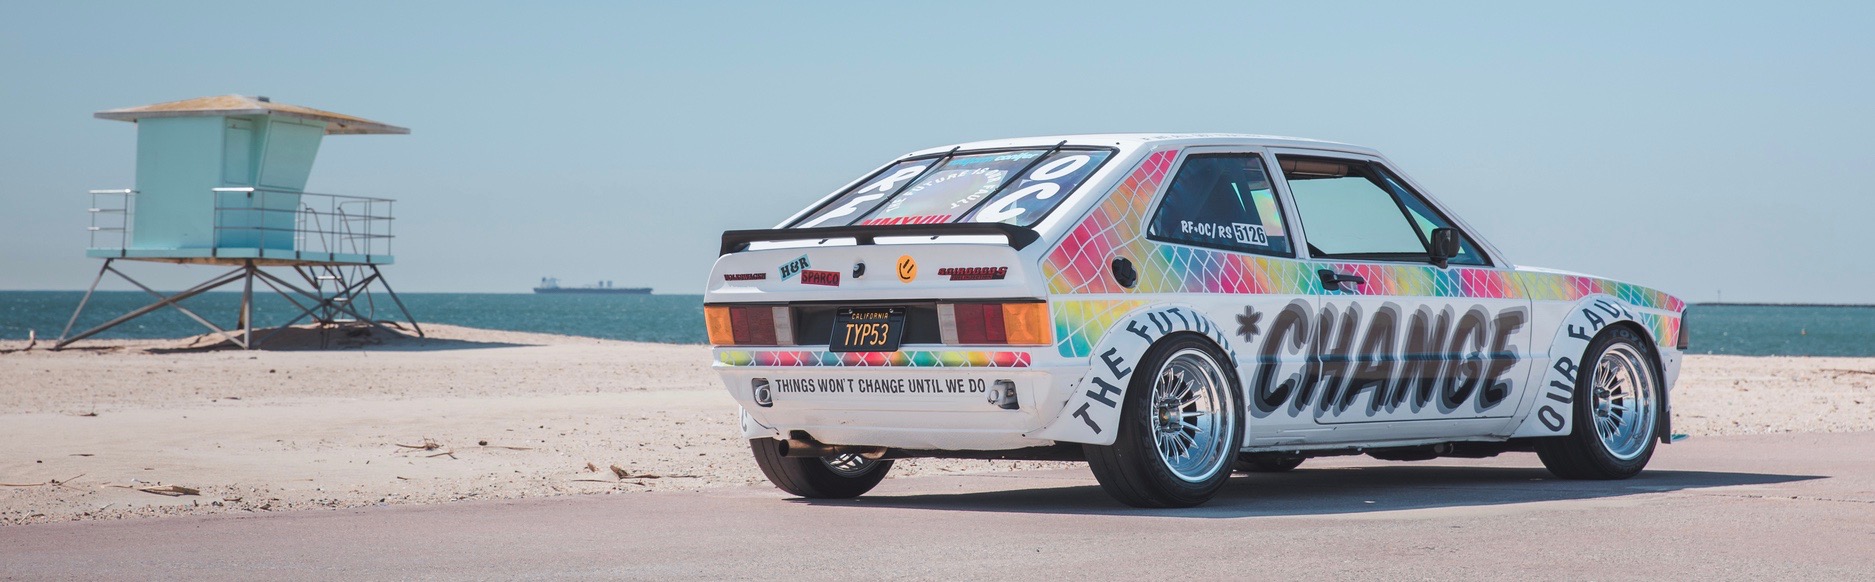 Volkswagen Scirocco, How a $7,000 car became the ‘Million-Dollar’ Scirocco, ClassicCars.com Journal